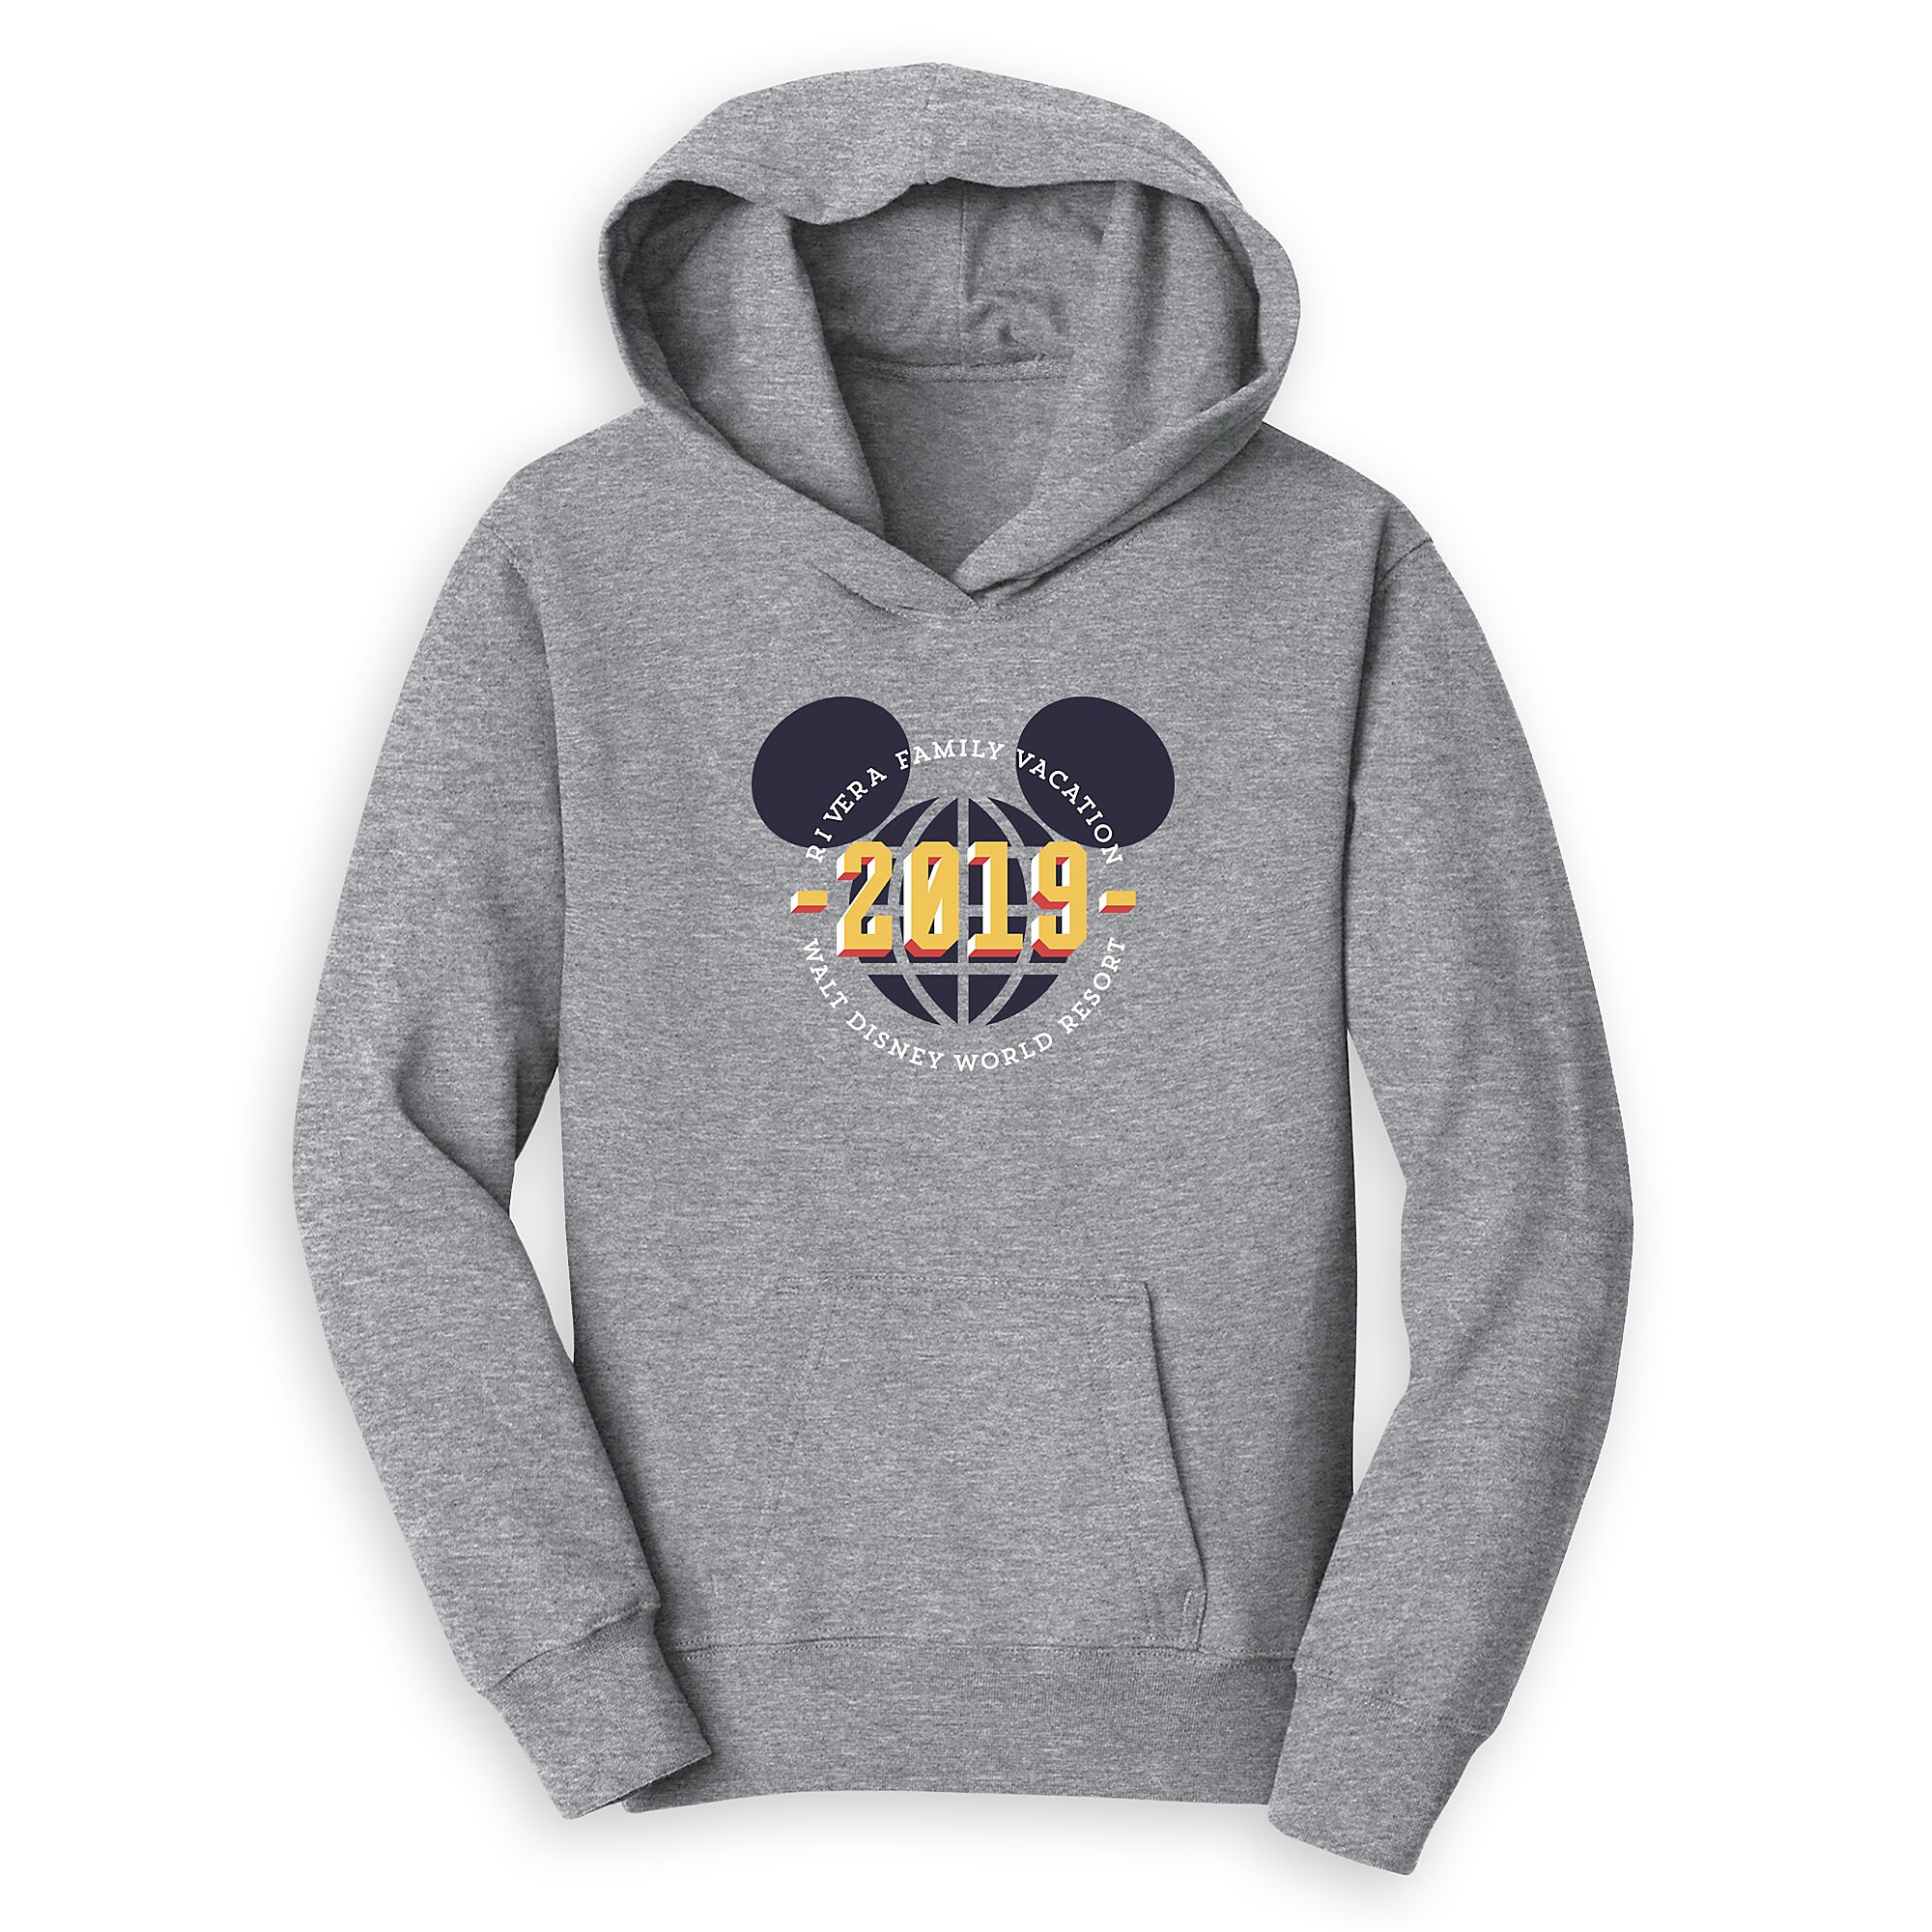 Kids' Mickey Mouse Family Vacation Pullover Hoodie - Walt Disney World Resort - 2019 - Customized